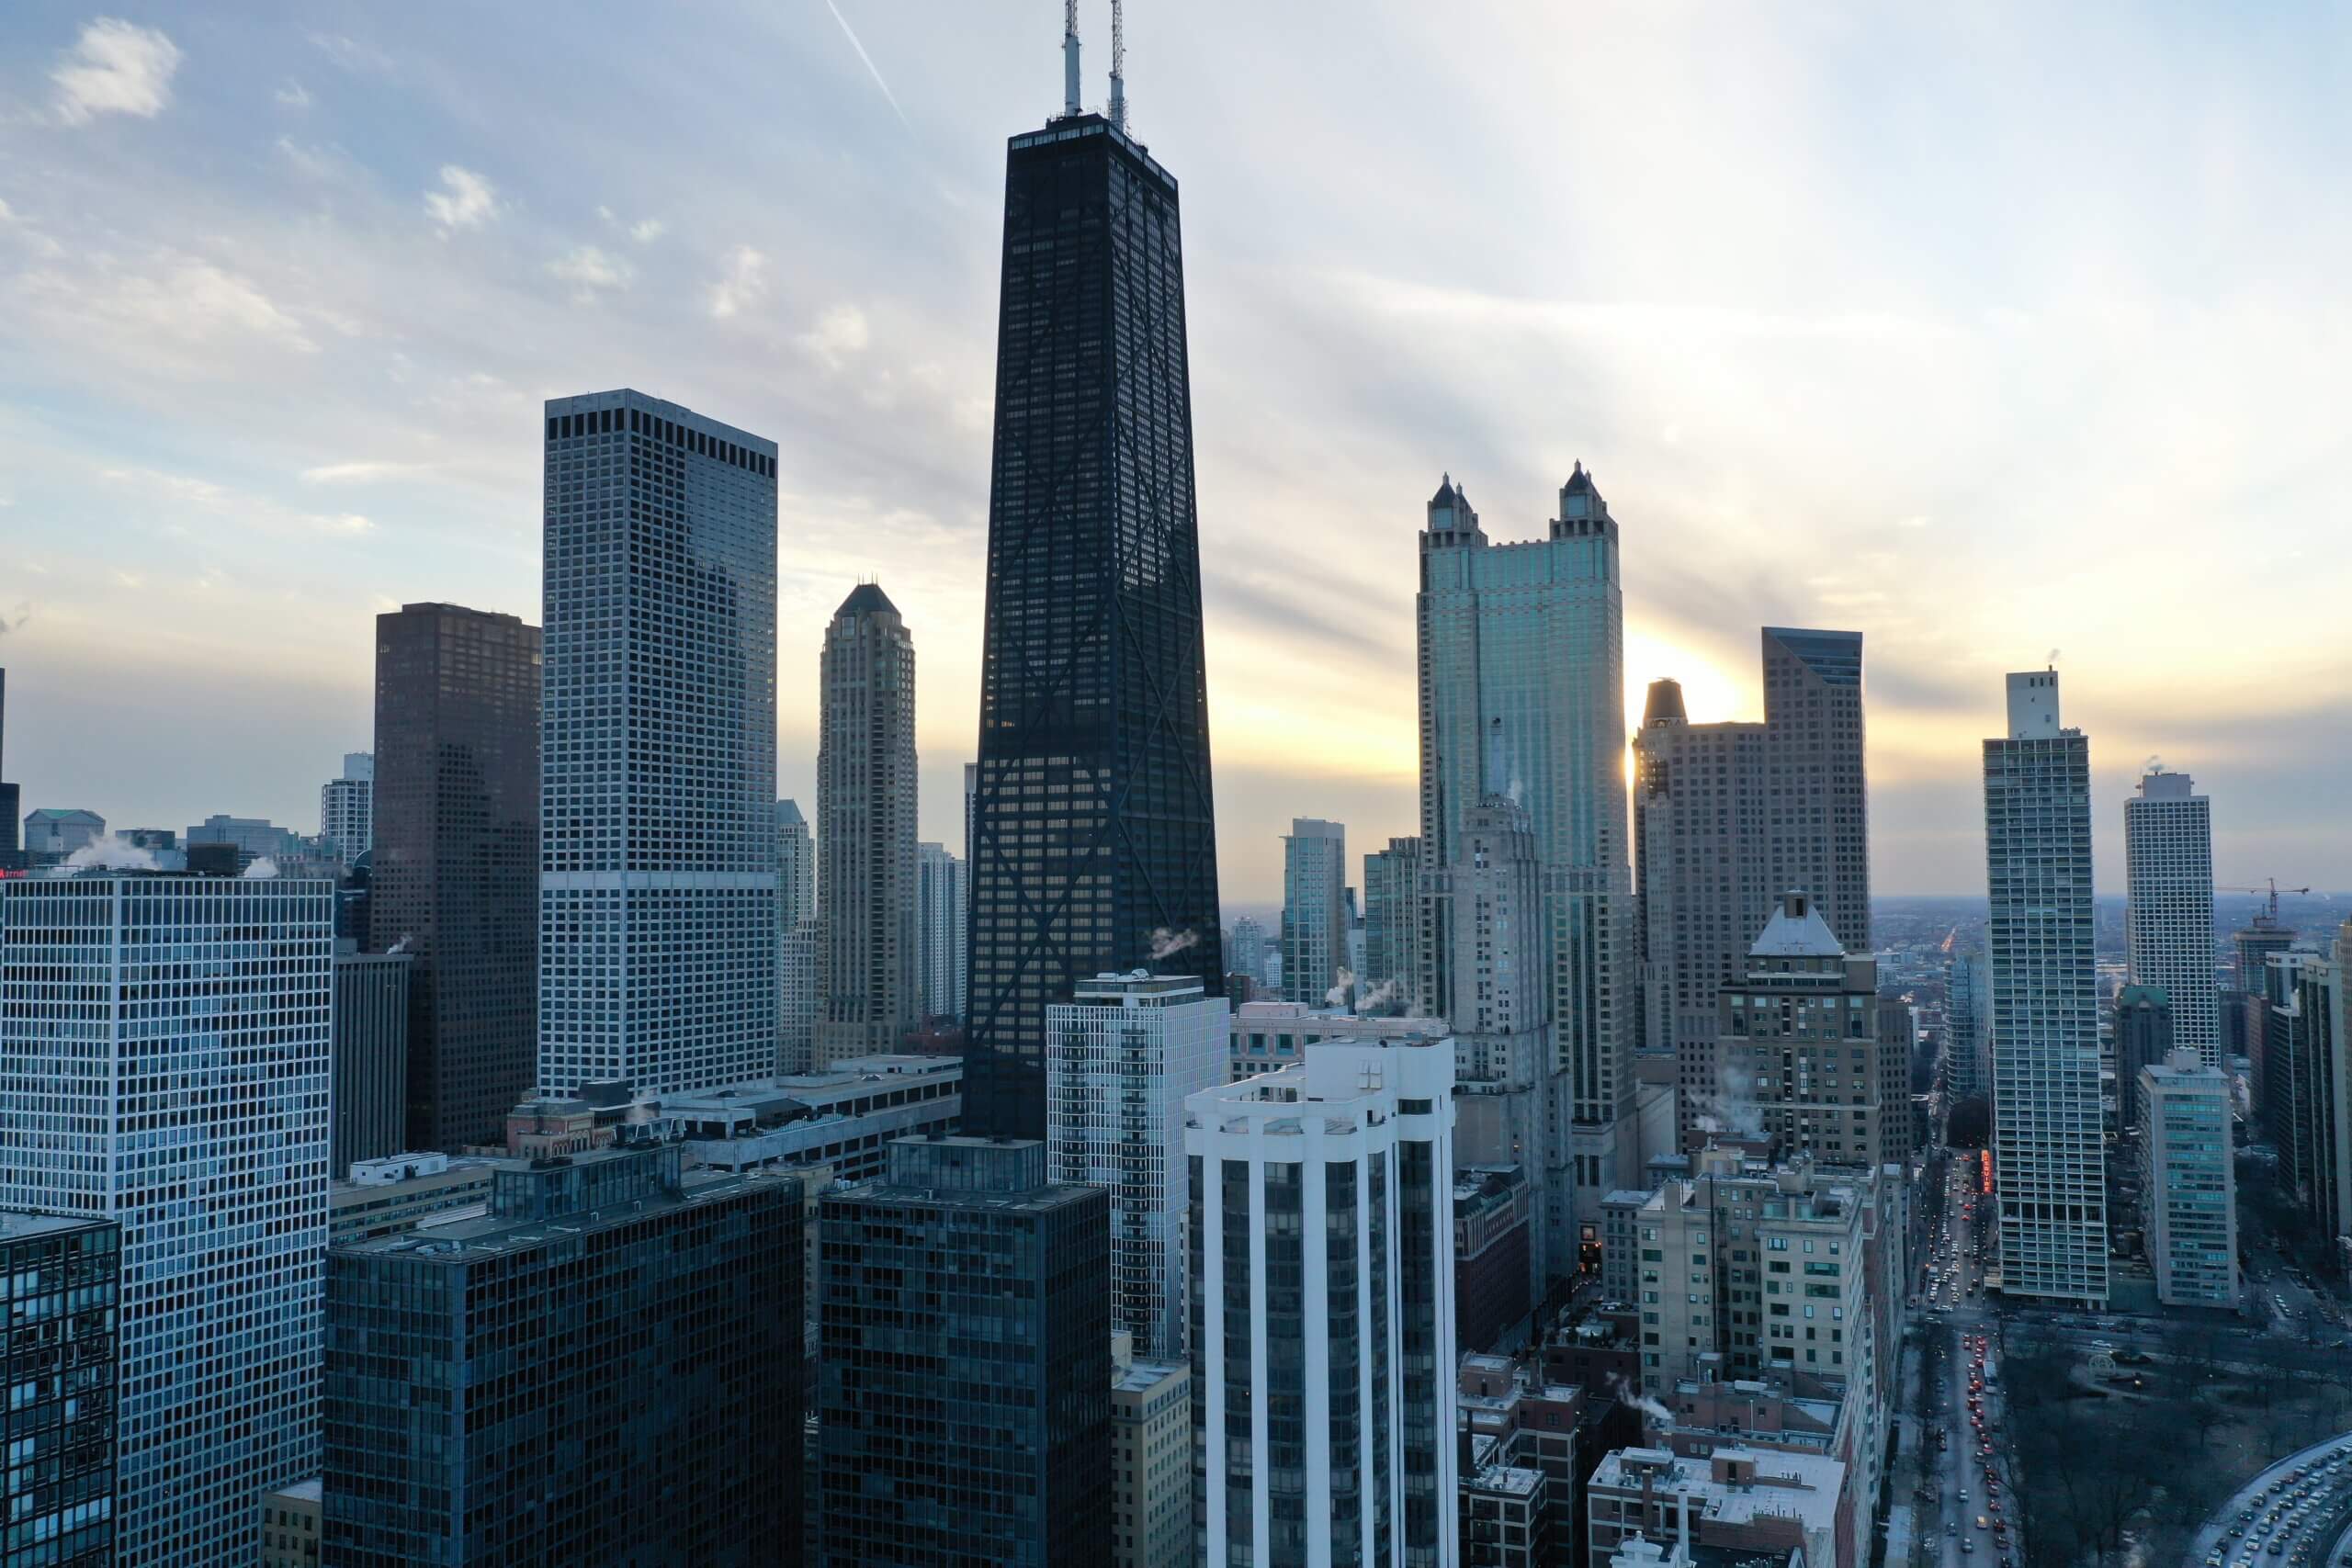 Views of Chicago and main buildings on the Magnificent Mile